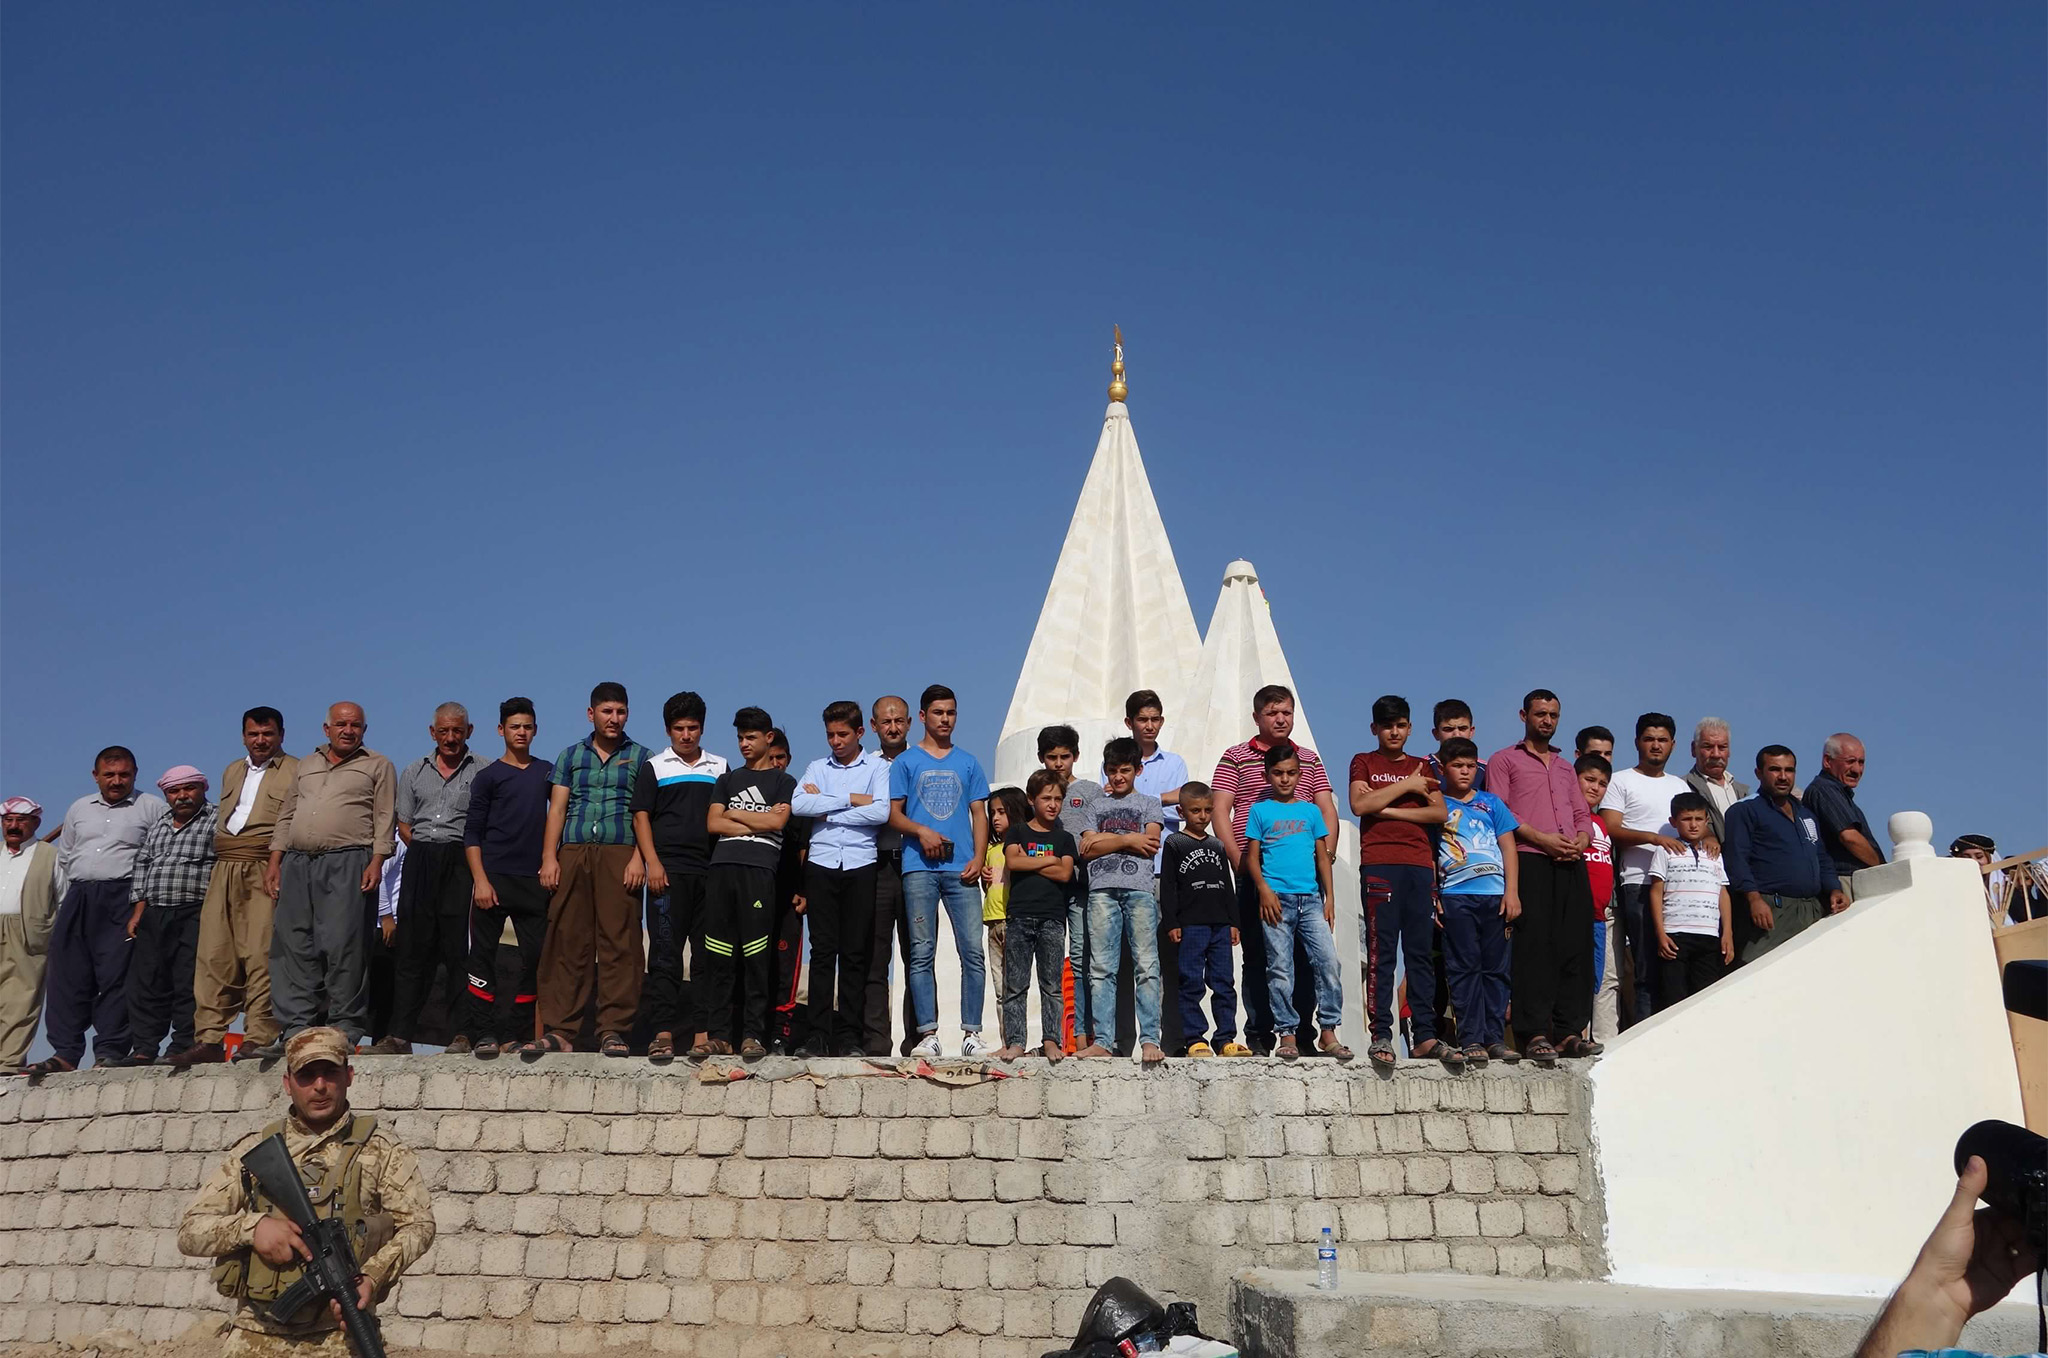 Yazidi men and boys gather at the ribbon-cutting ceremony for a reconstructed Yazidi temple in Khoshaba, Iraq, September 2017.